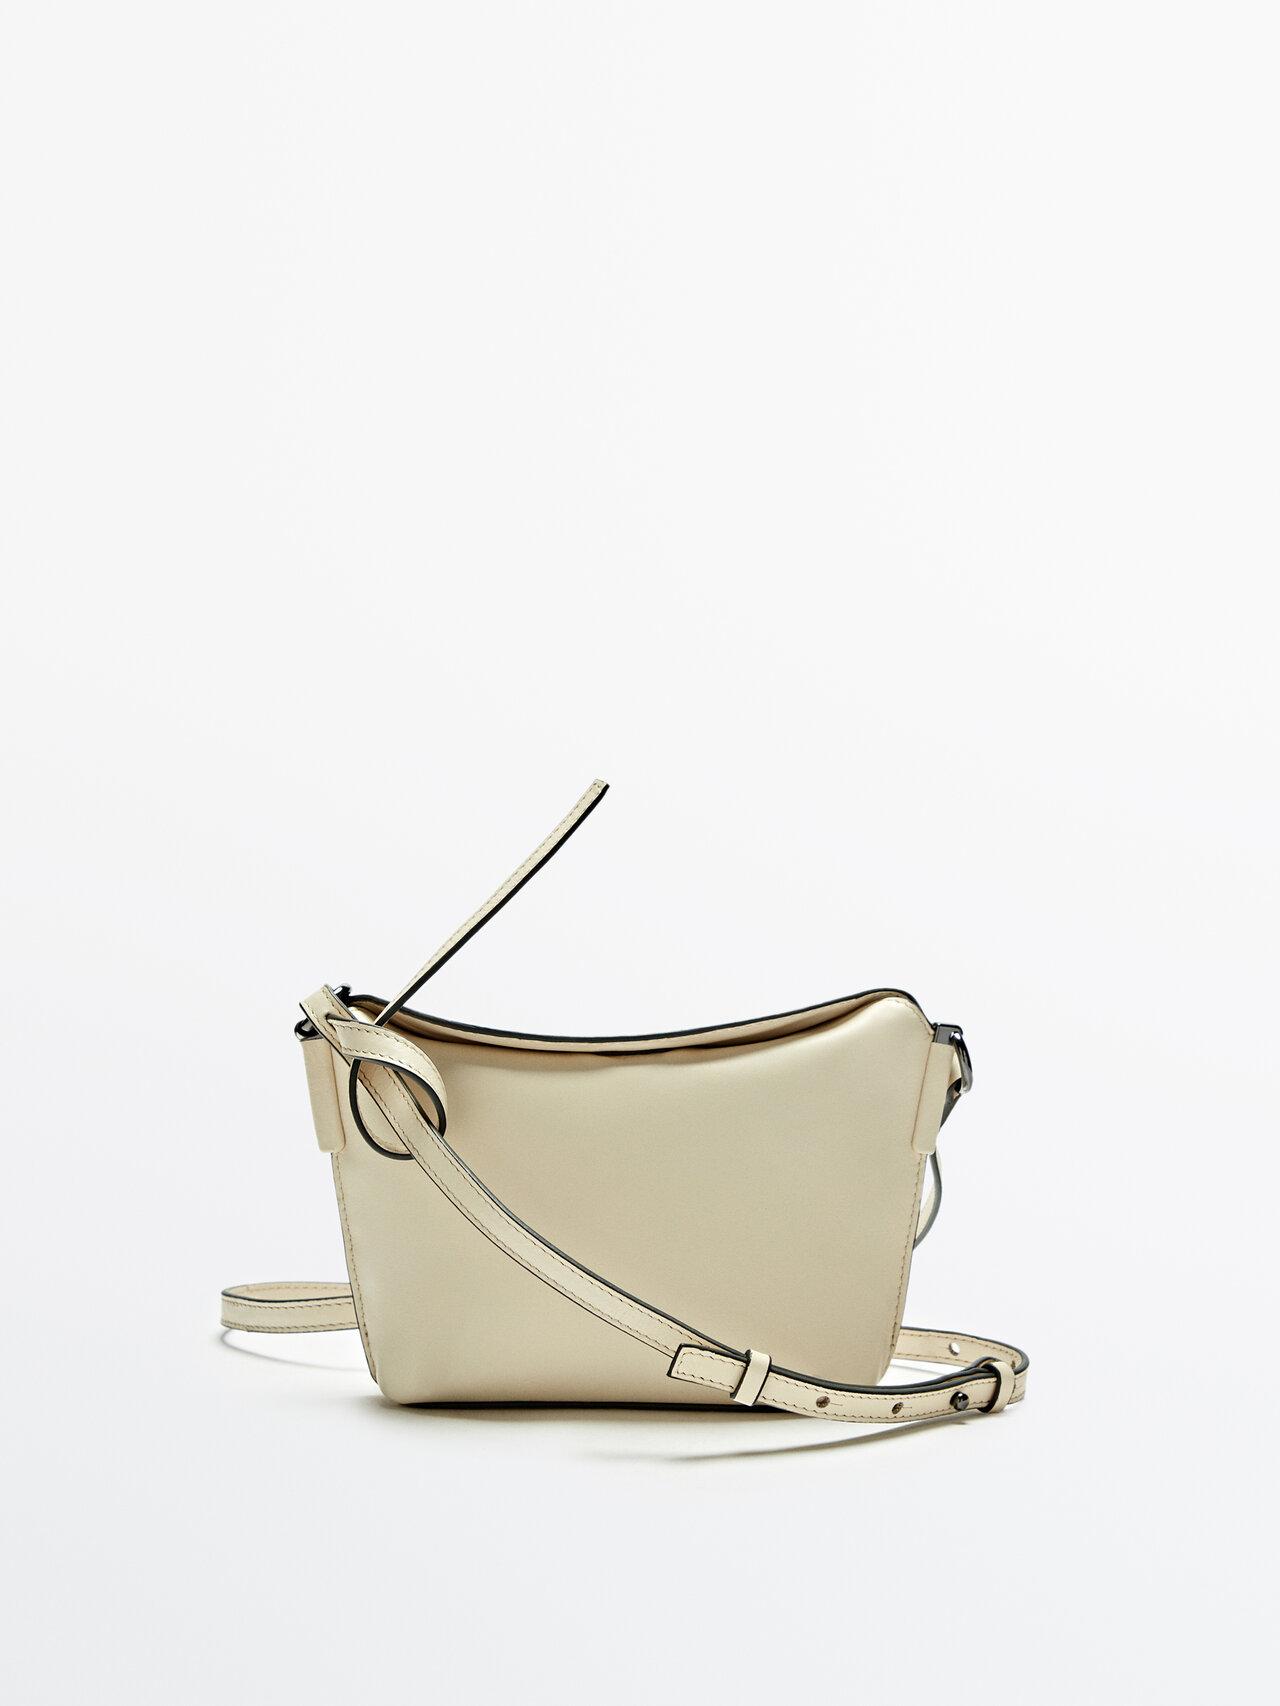 MASSIMO DUTTI Leather Crossbody Bag With Seam Details in Natural | Lyst